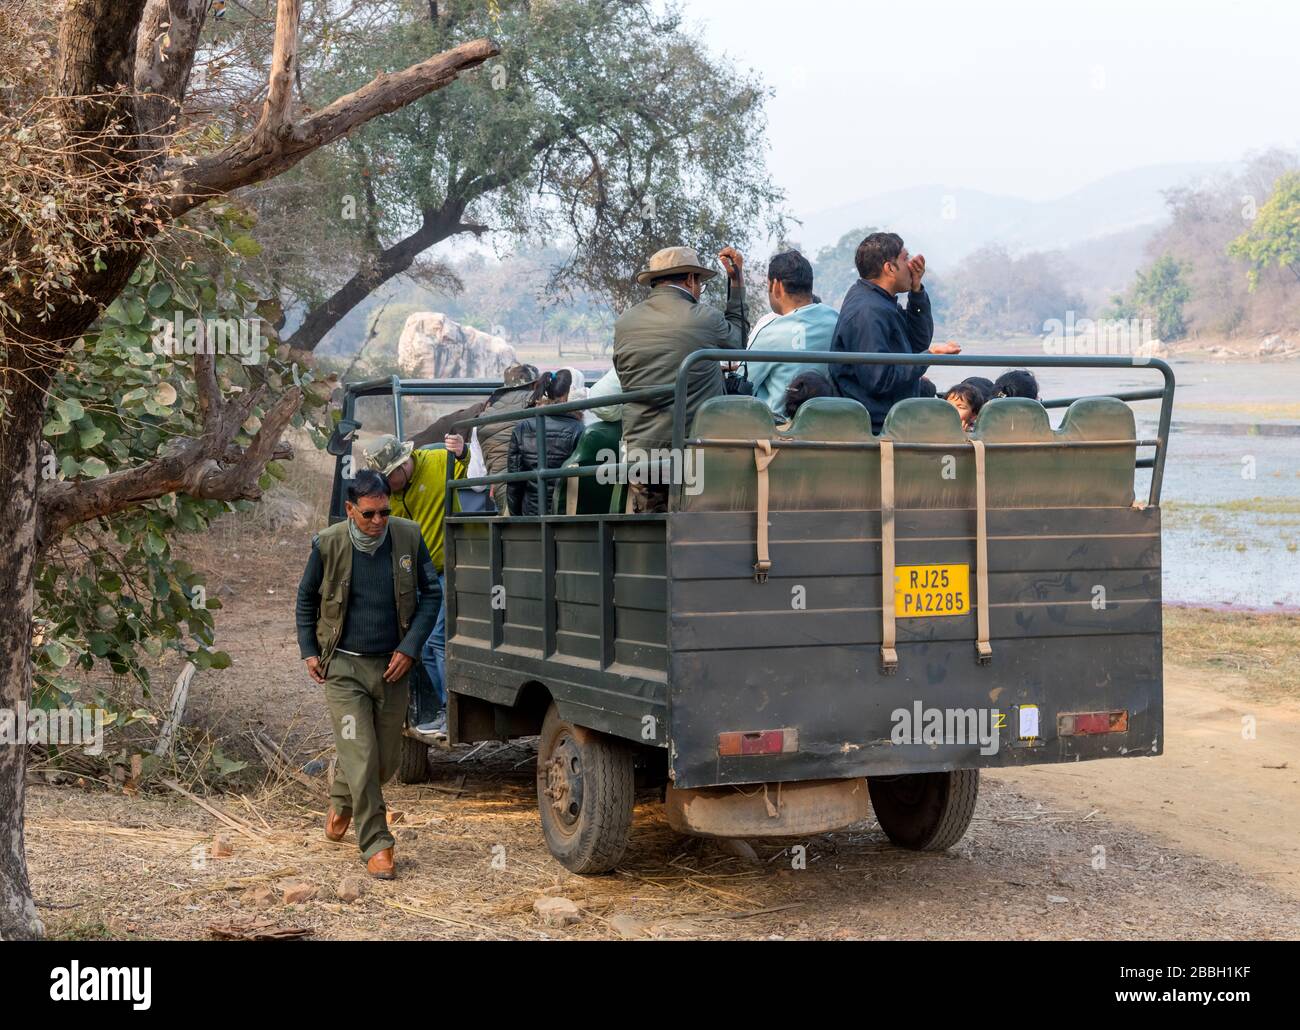 Tourists in a Canter safari vehicle on a Tiger Safari in Ranthambore National Park, Rajasthan, India Stock Photo